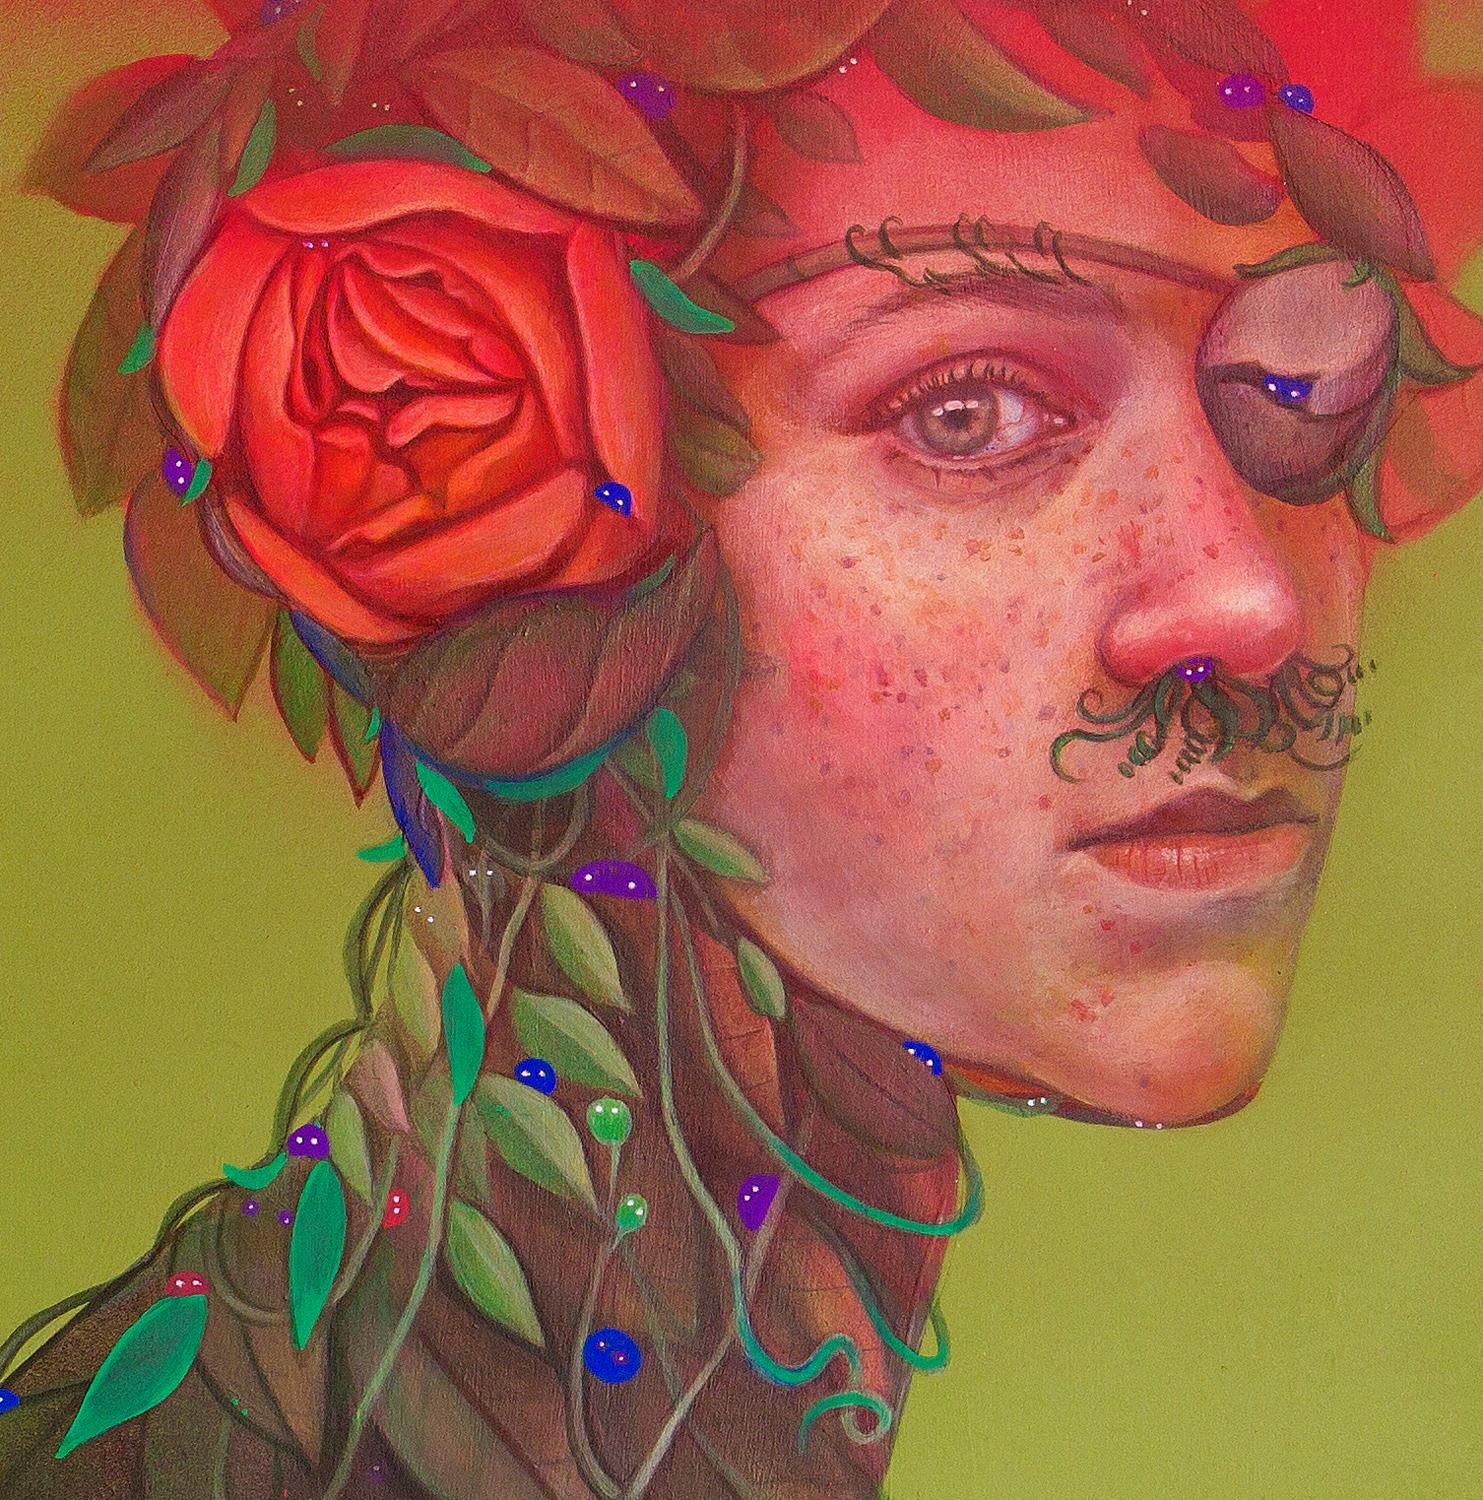 Contemporary Pop Surrealistic Portrait. Pirate with plants and insects - Painting by Natasha Lelenco